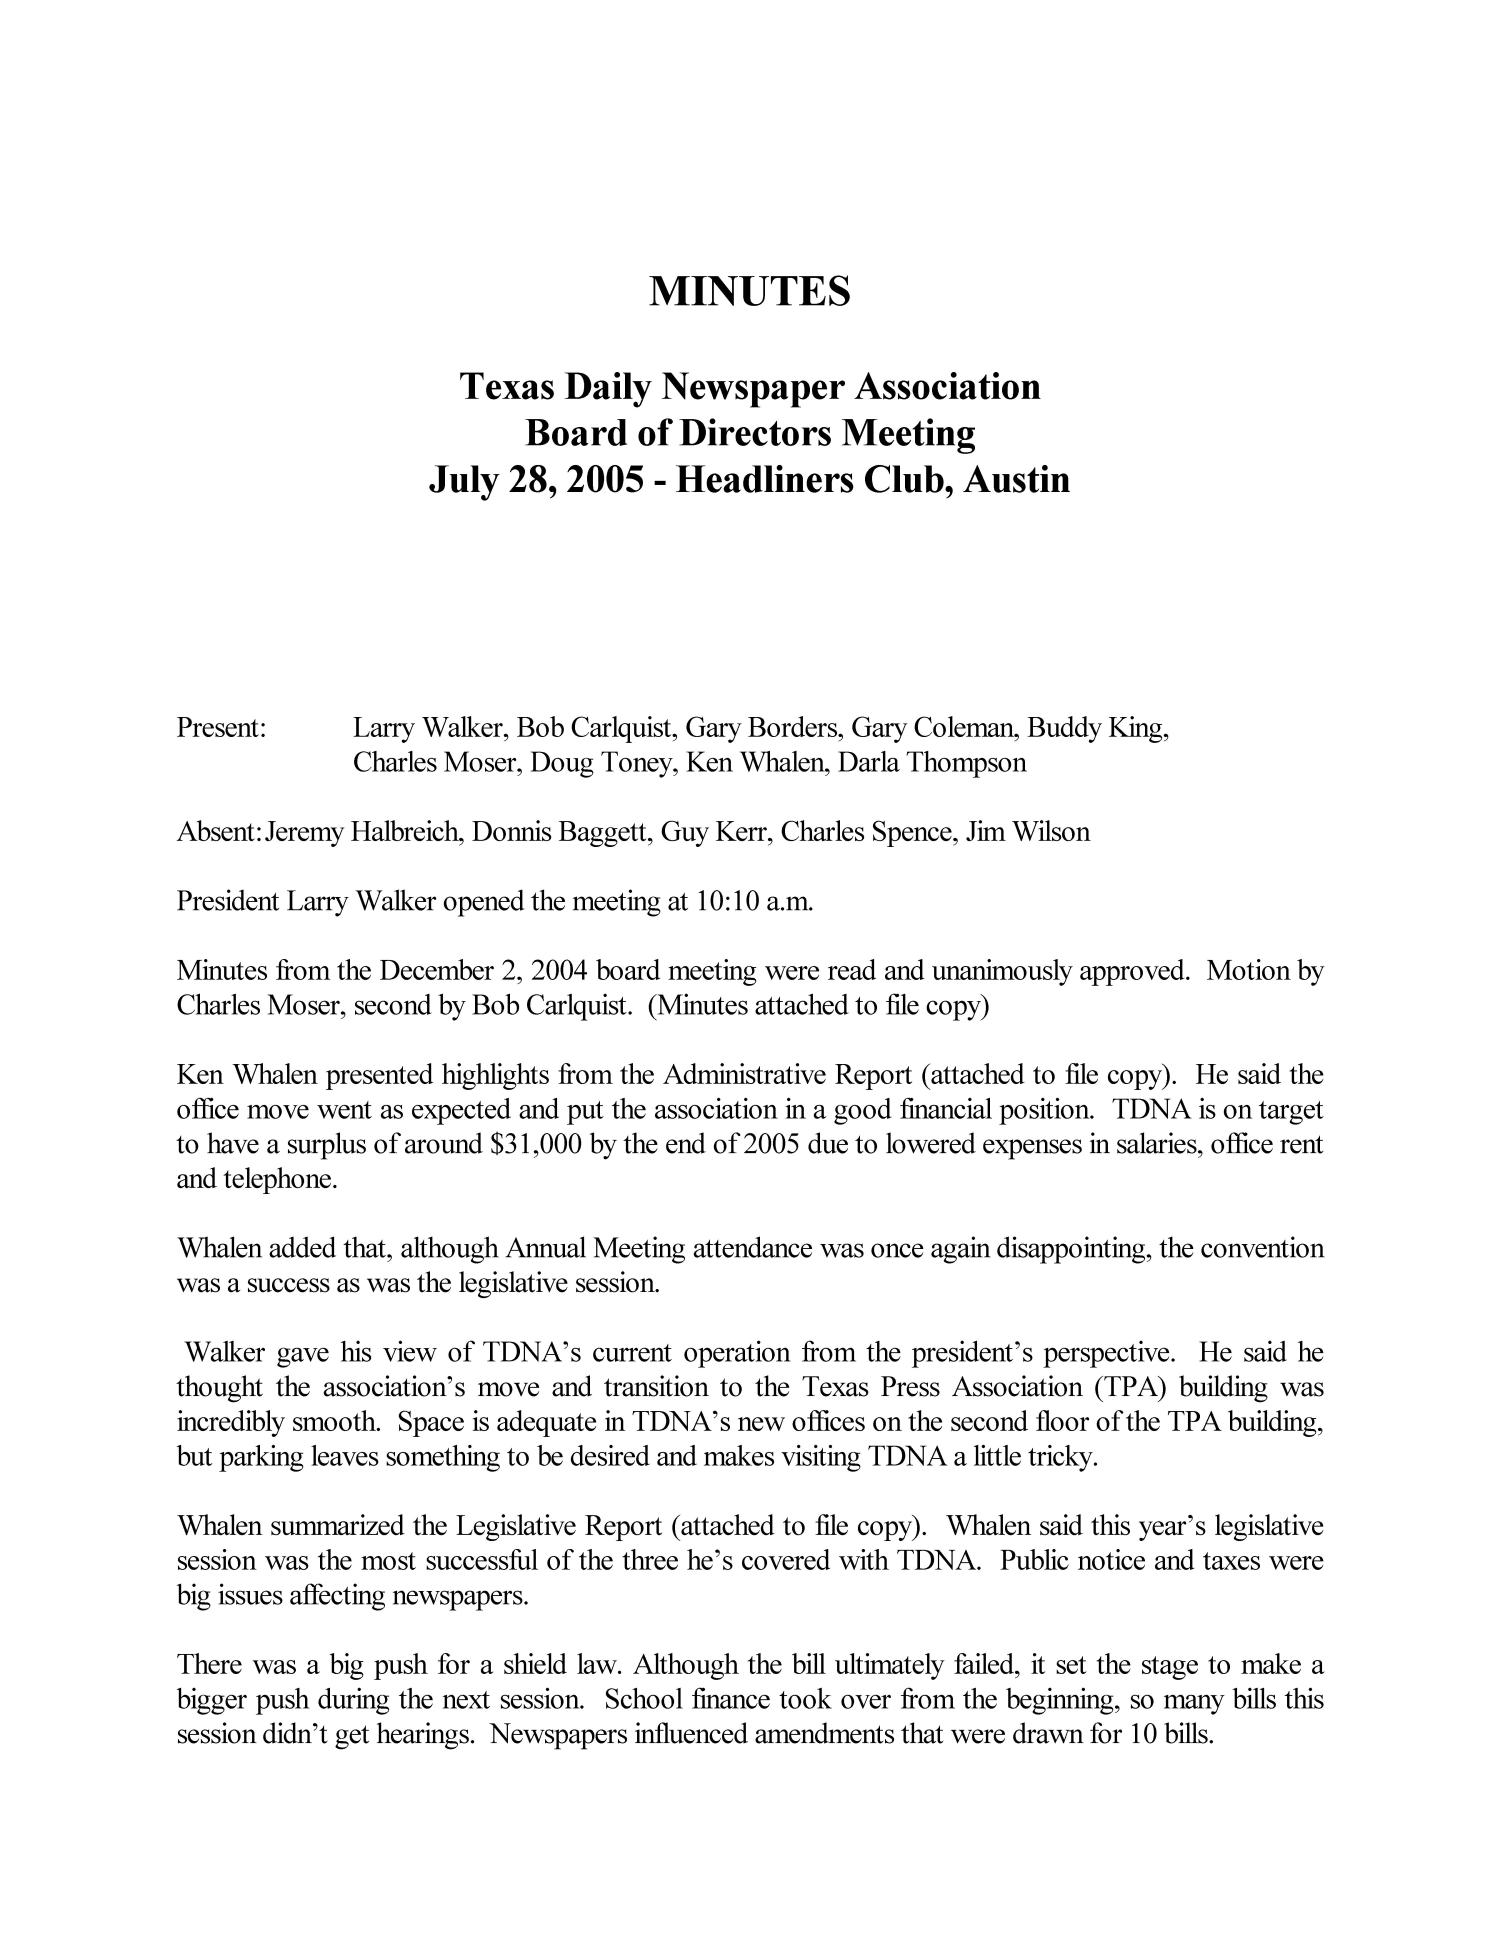 TDNA Meeting Minutes, July 28, 2005
                                                
                                                    [Sequence #]: 1 of 4
                                                